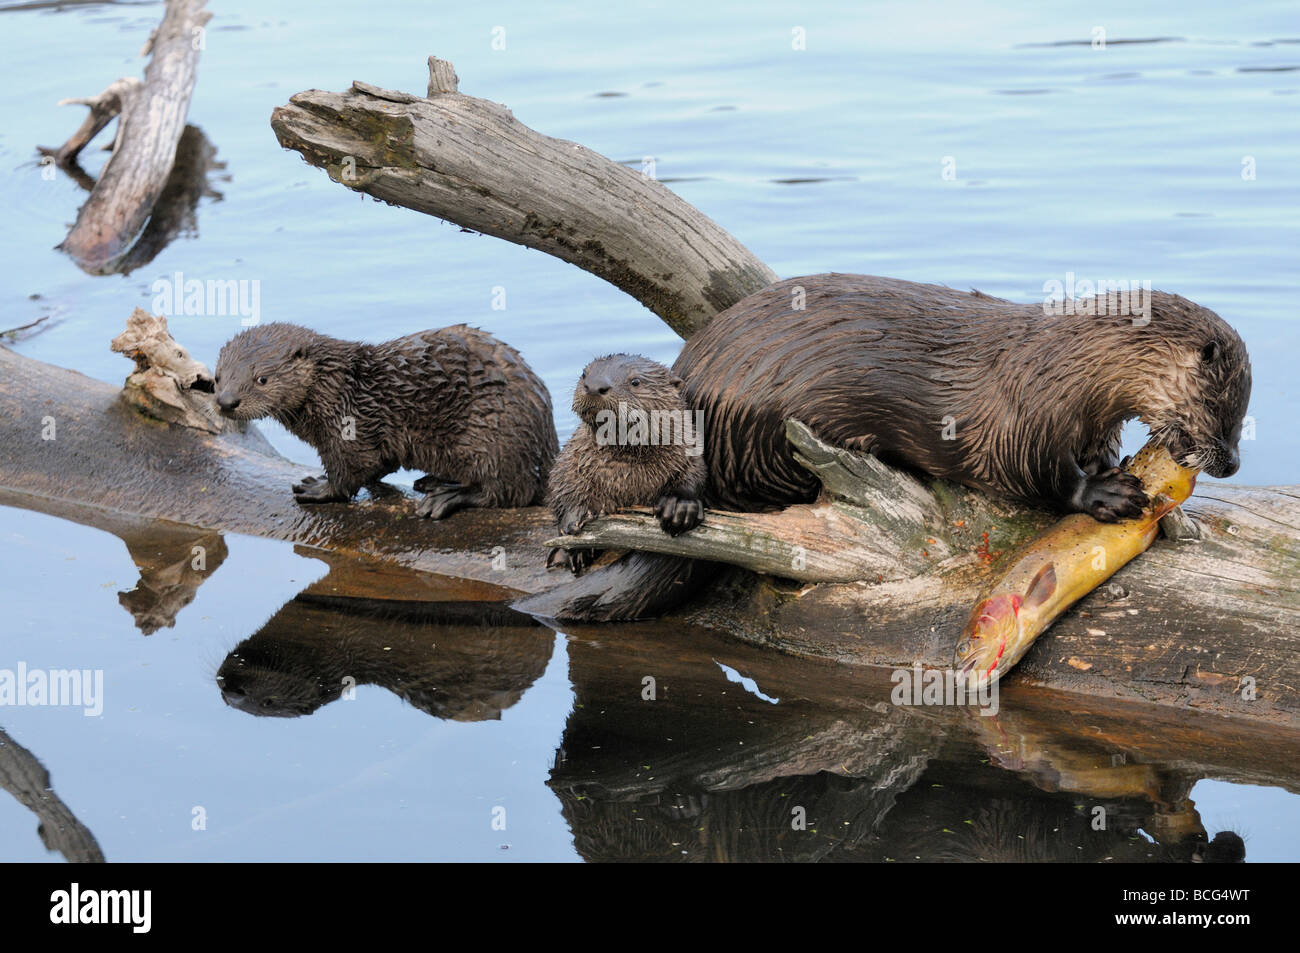 Stock photo of a river otter family on a log with a fish, Yellowstone National Park, Montana, USA Stock Photo